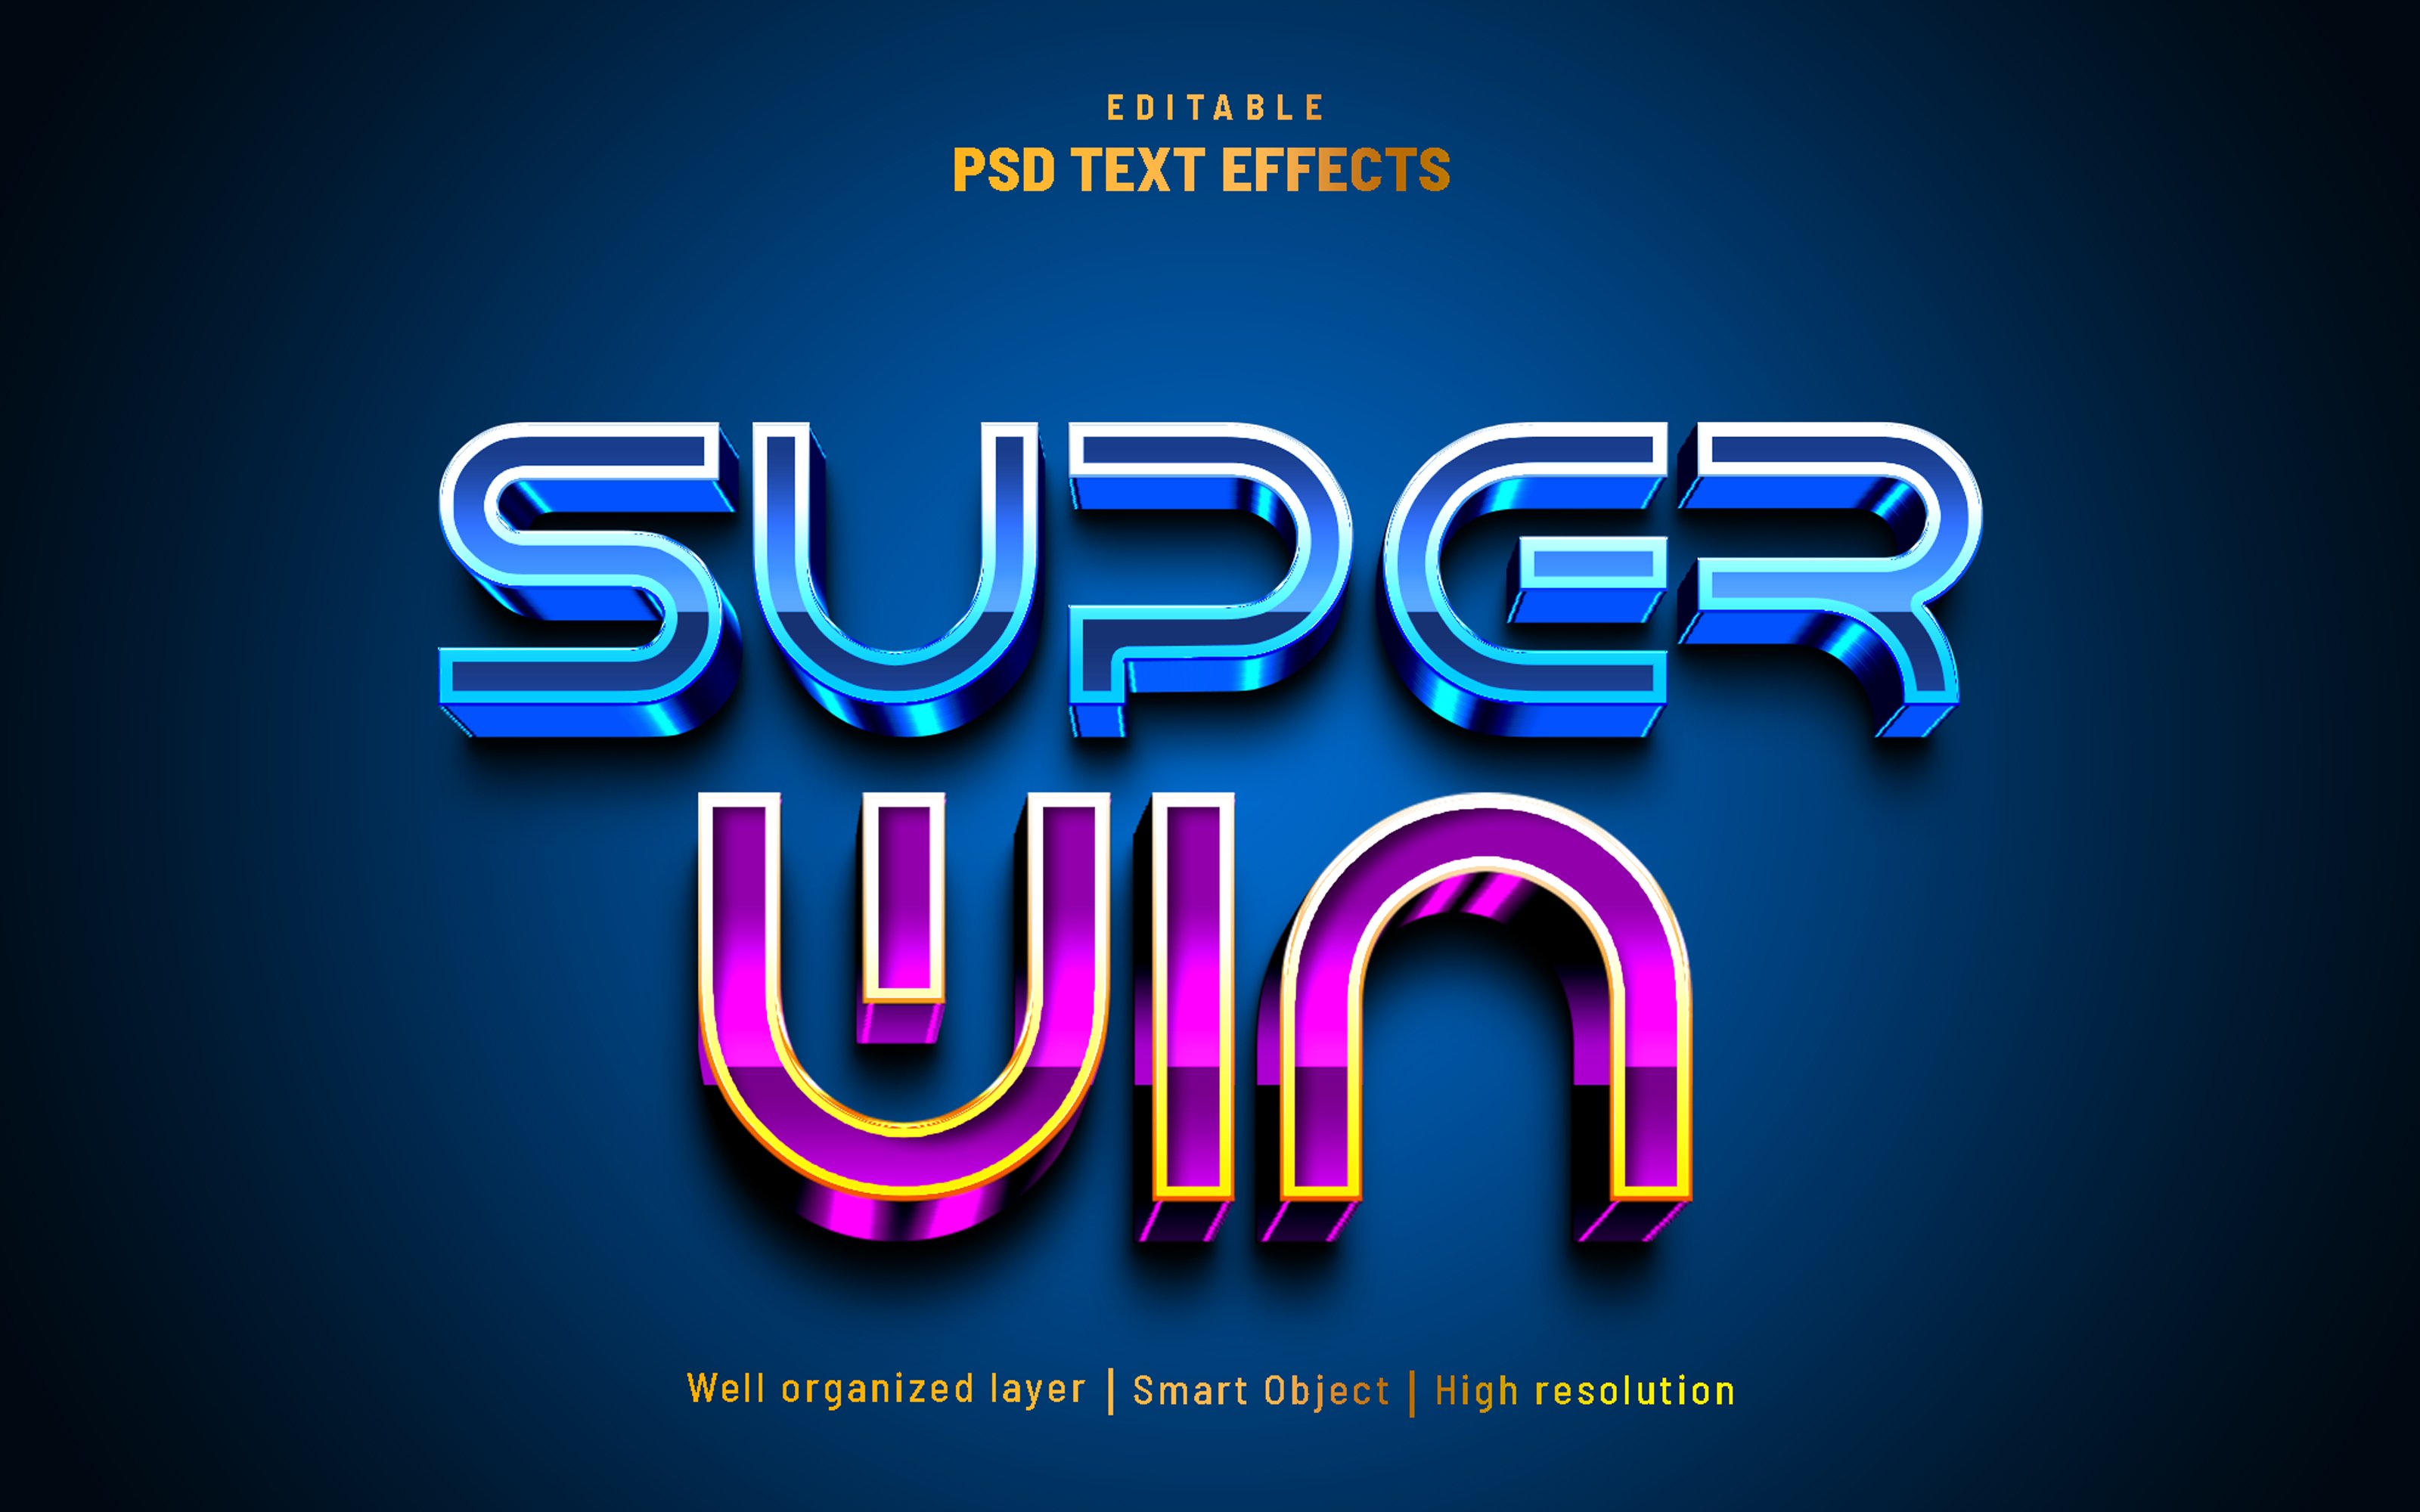 Super win editable text effect PSDcover image.